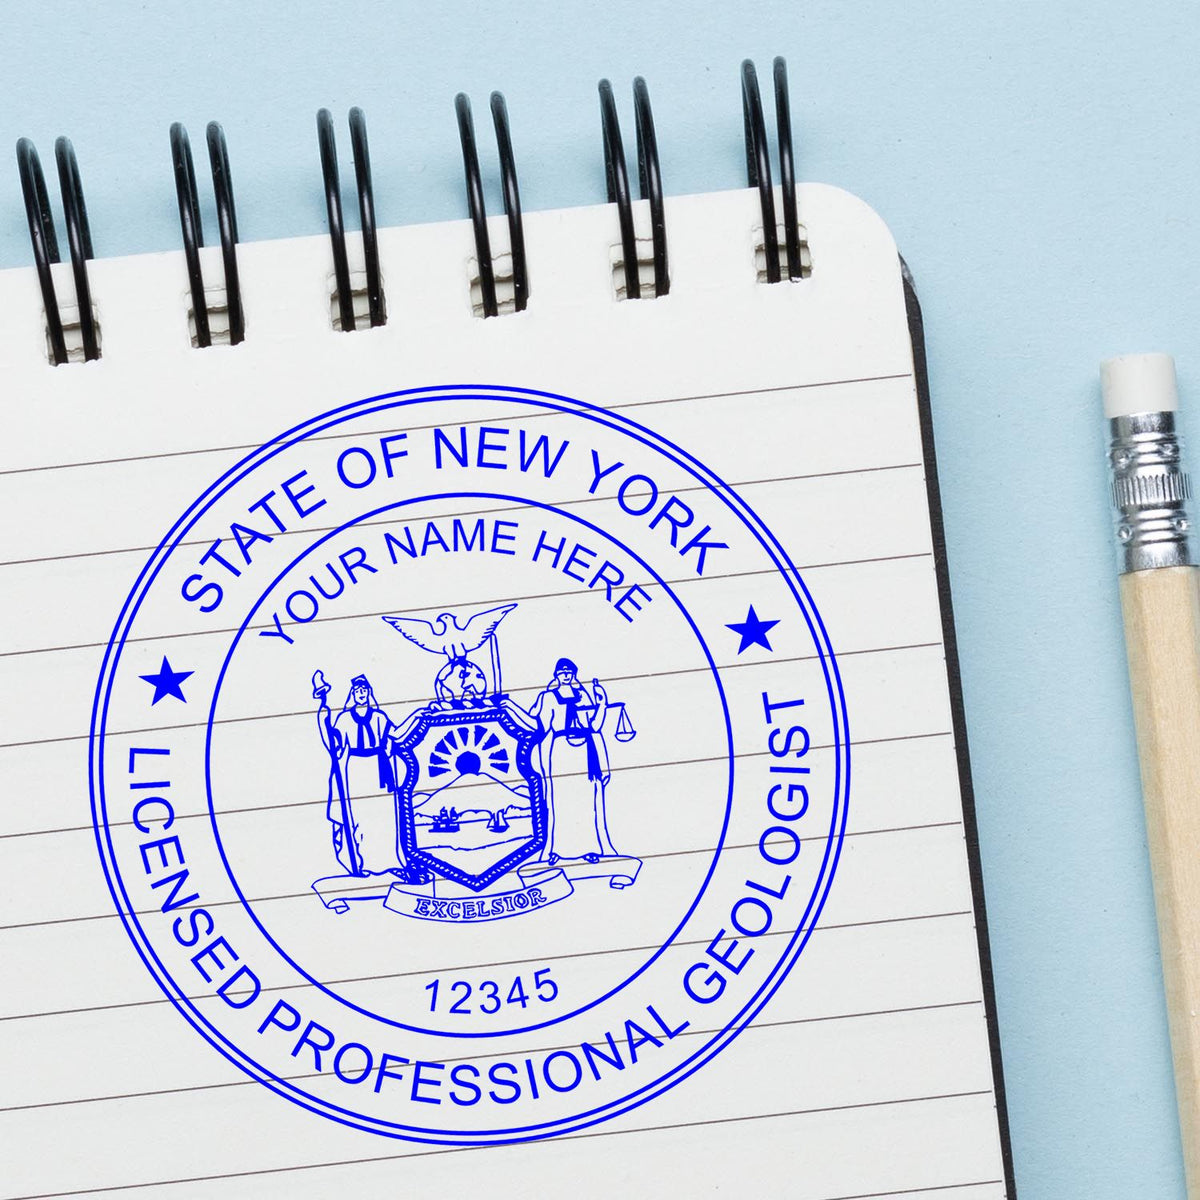 This paper is stamped with a sample imprint of the Self-Inking New York Geologist Stamp, signifying its quality and reliability.